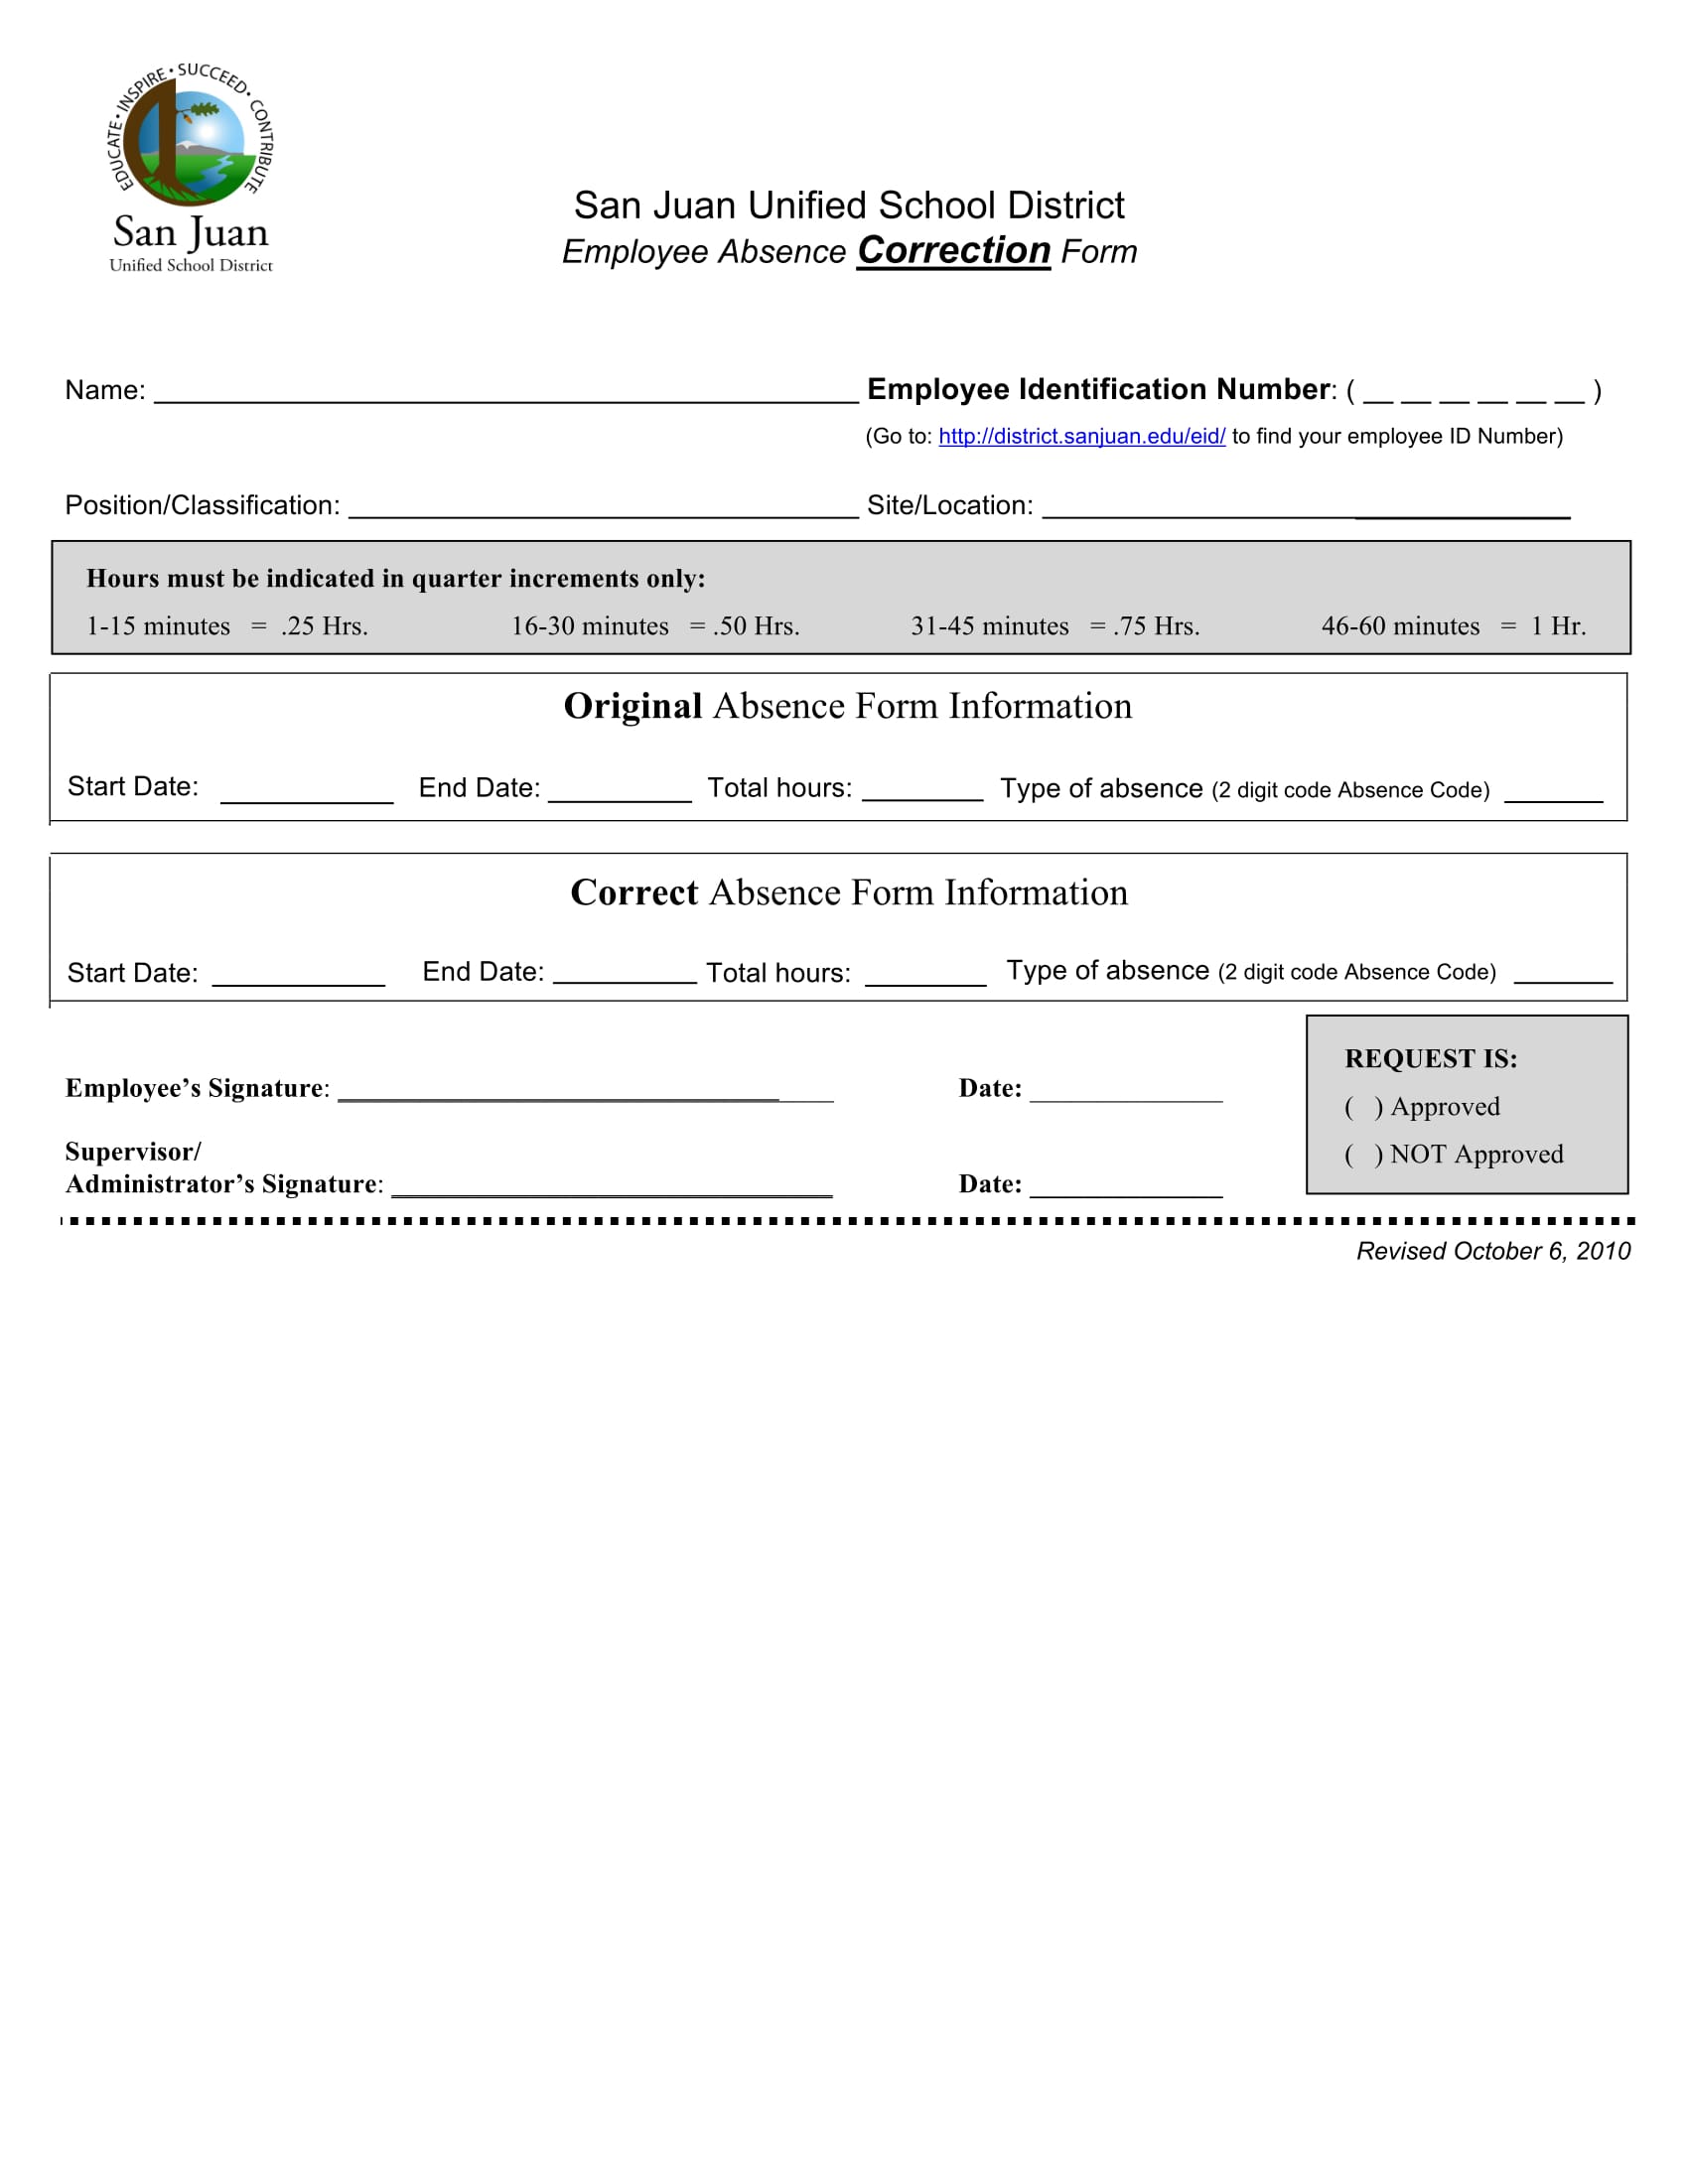 employee absence correction form 1